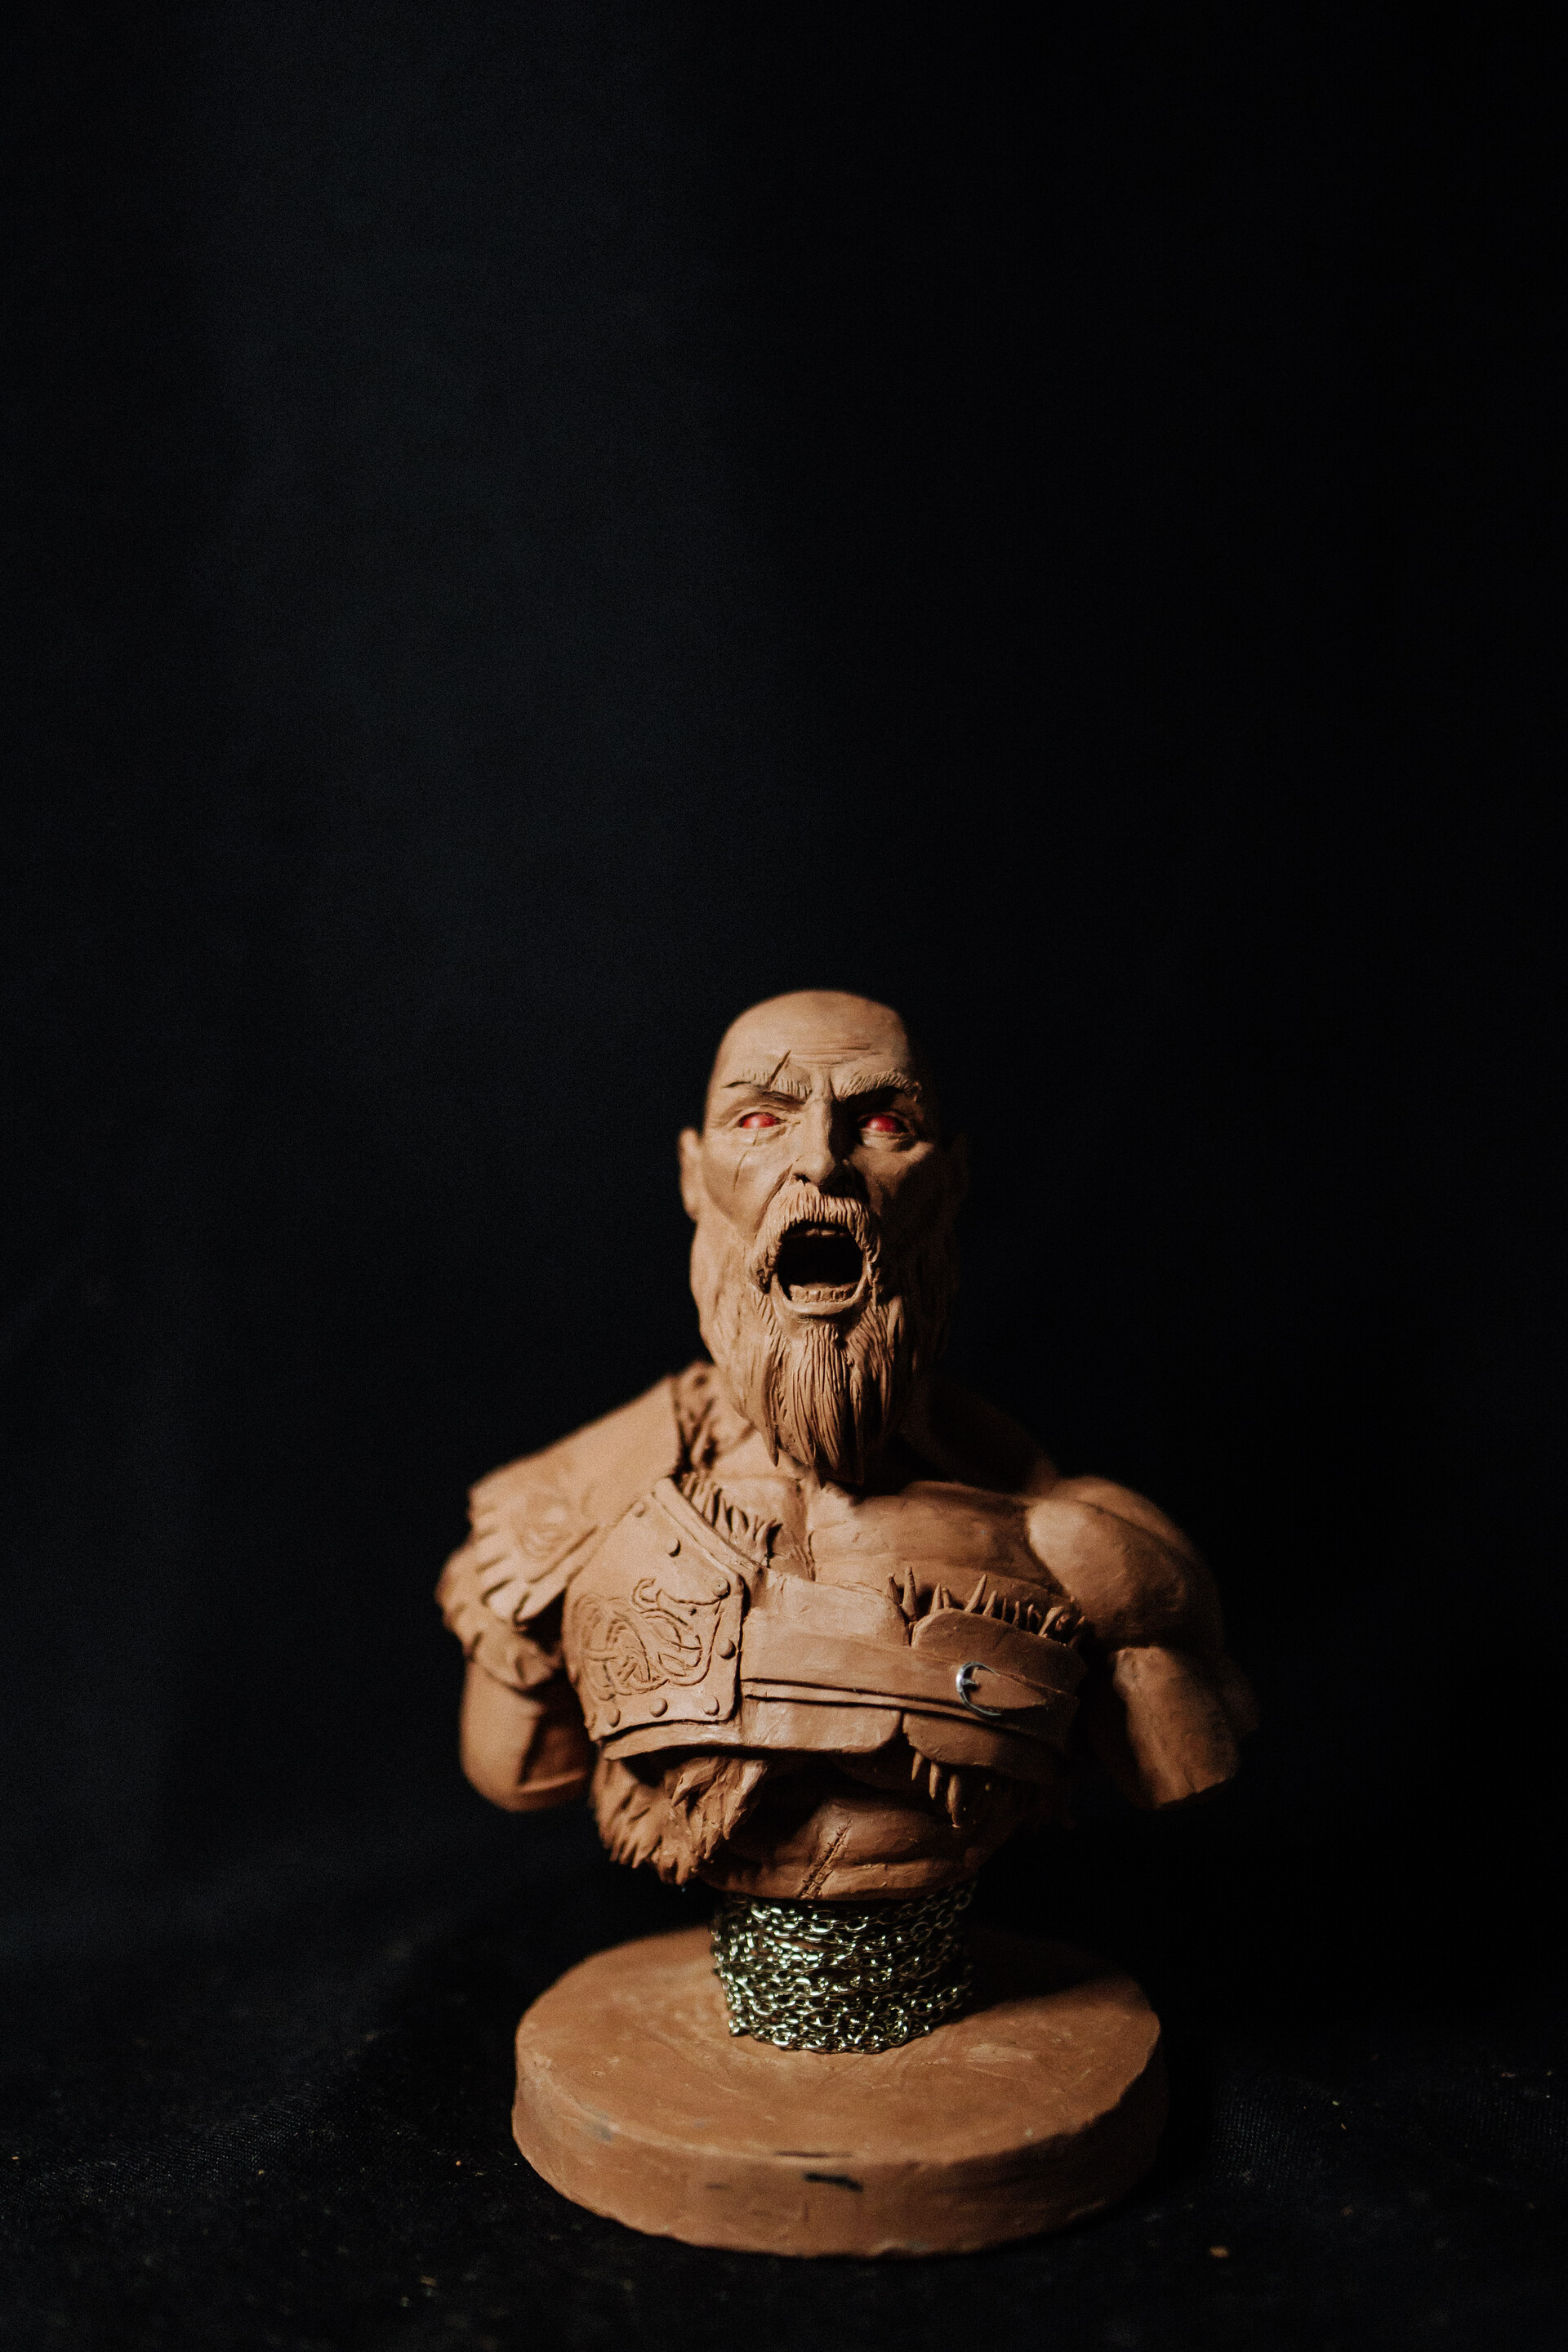 Busts and bas-reliefs of famous people - Kratos God of War